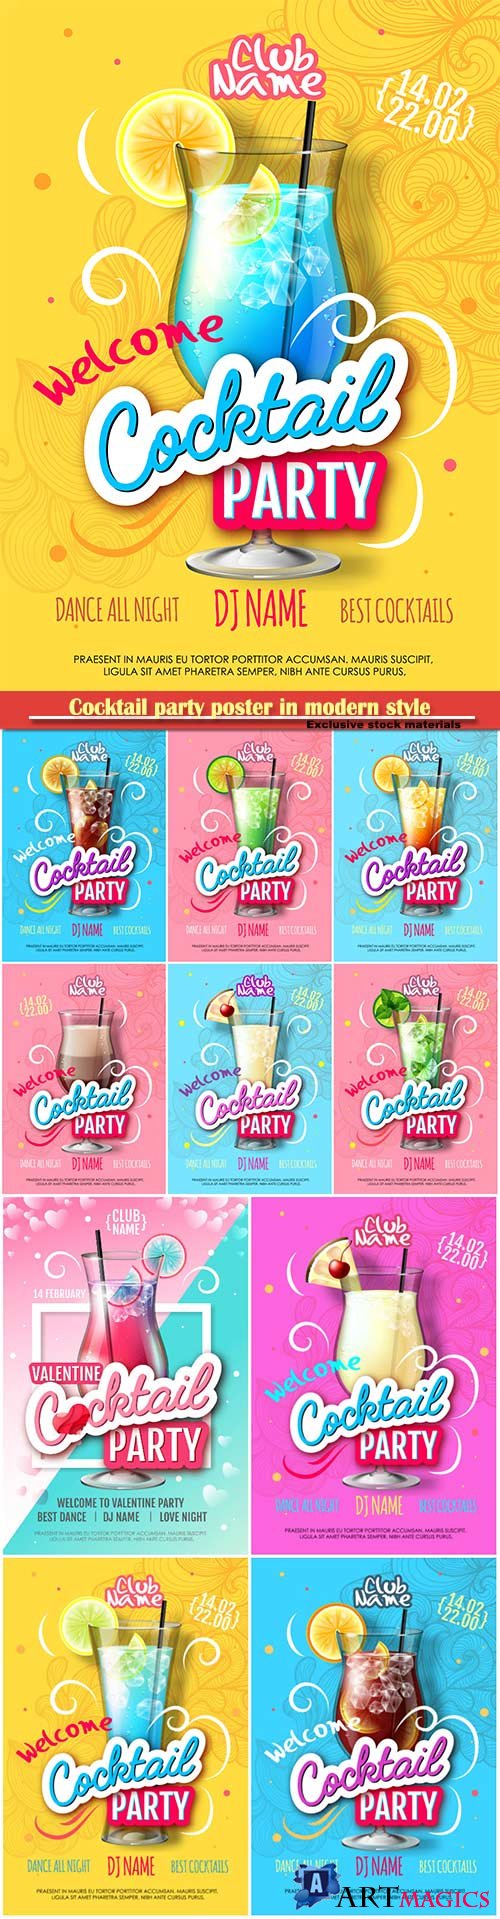 Cocktail party poster in modern style, realistic cocktail vector illustration